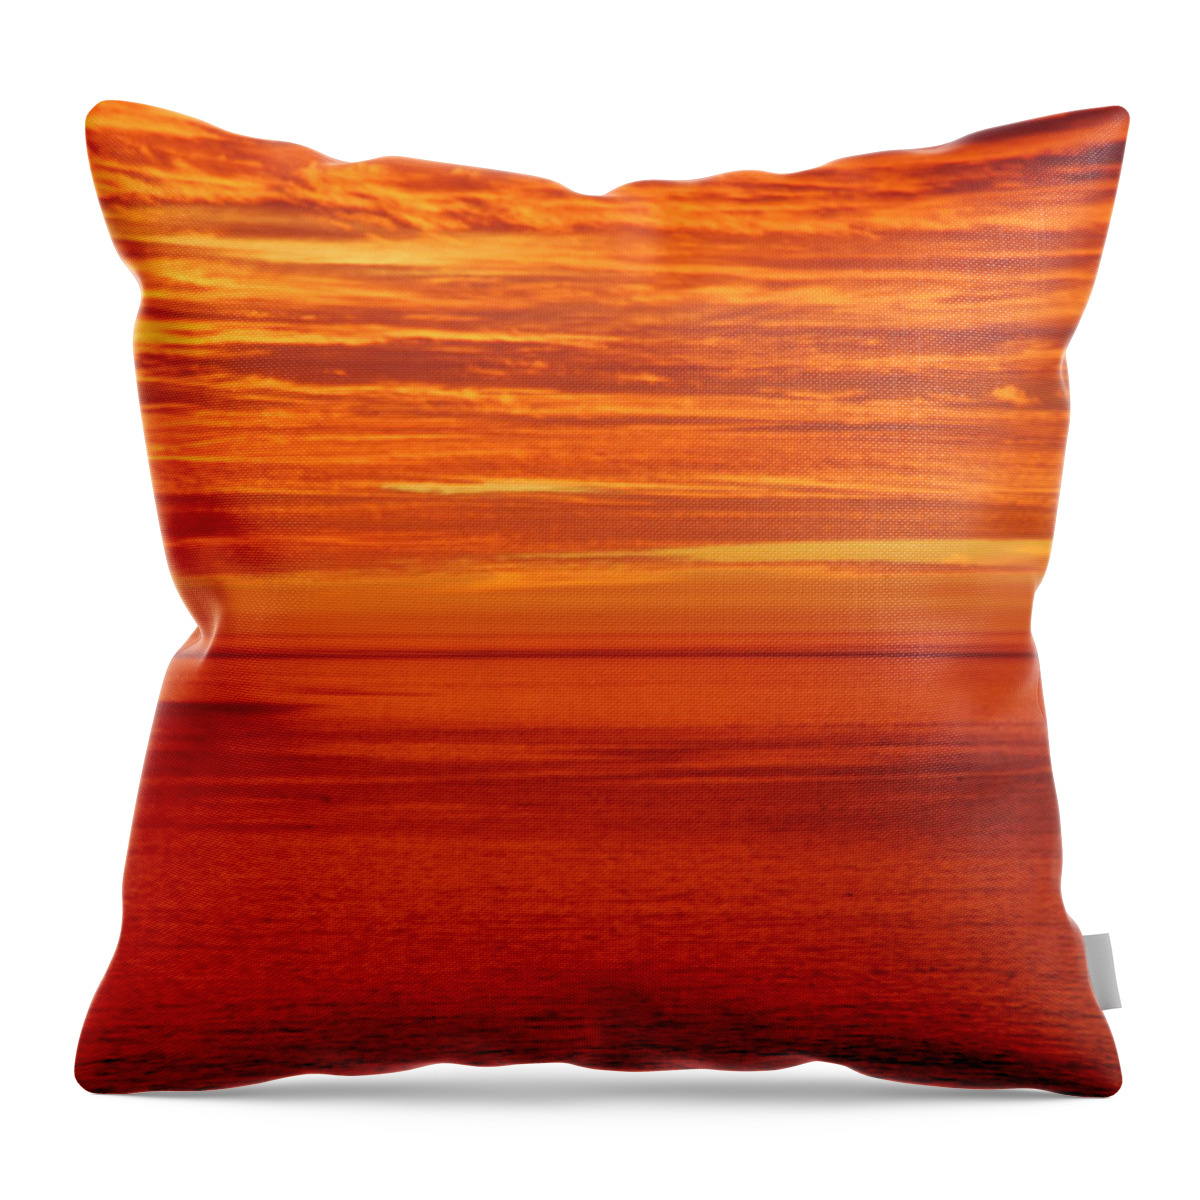 Sunset Throw Pillow featuring the photograph Burning Sky by Steed Edwards